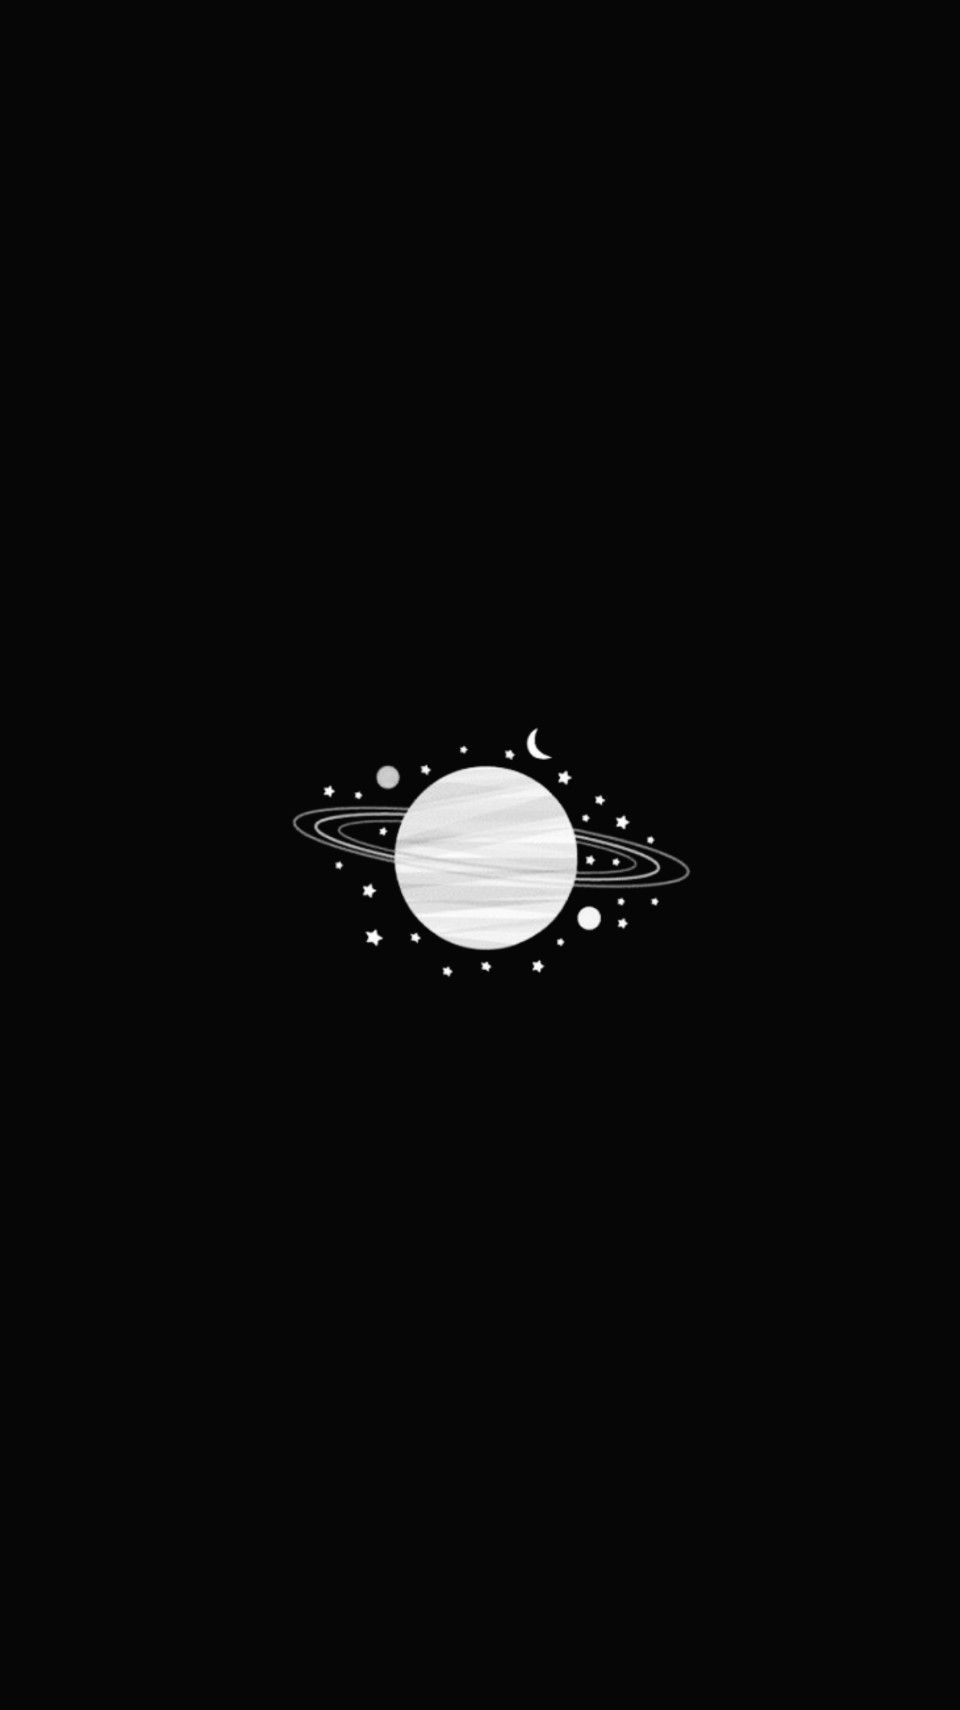 IPhone wallpaper of a white planet surrounded by stars - Dark, modern